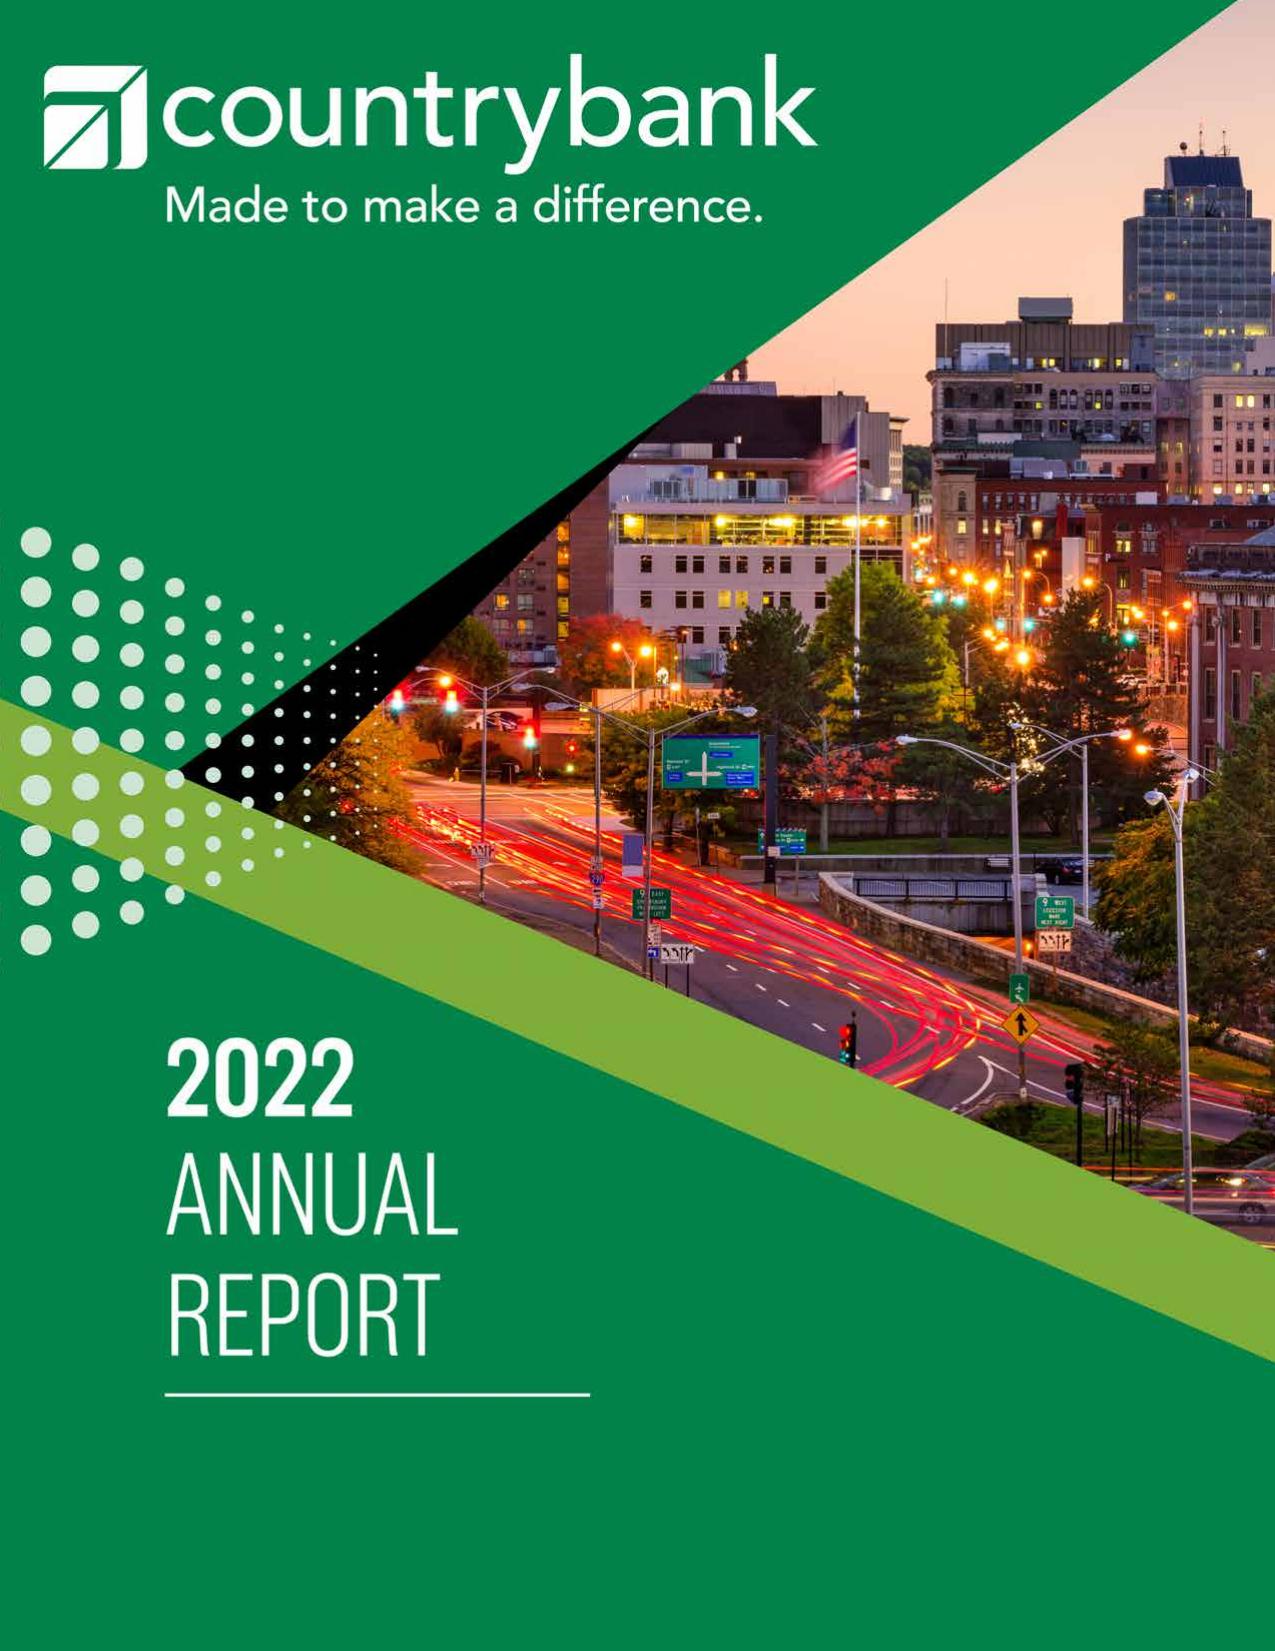 COUNTRYBANK 2022 Annual Report